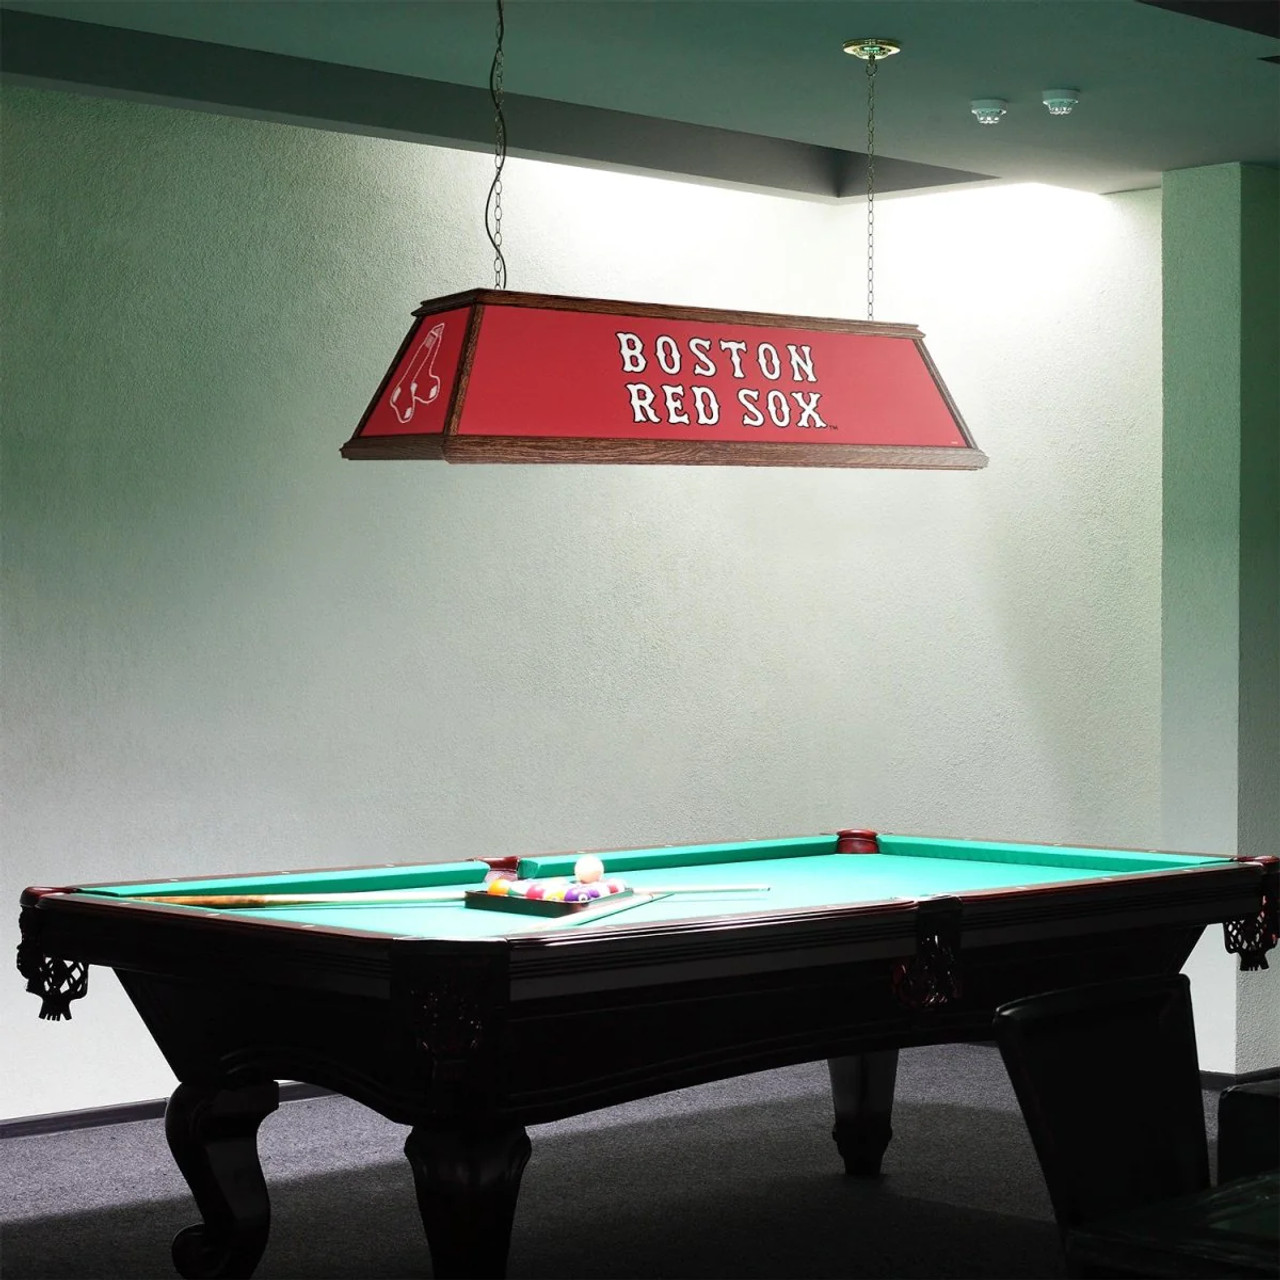 Boston Red Sox: Premium Wood Pool Table Light "A" Version